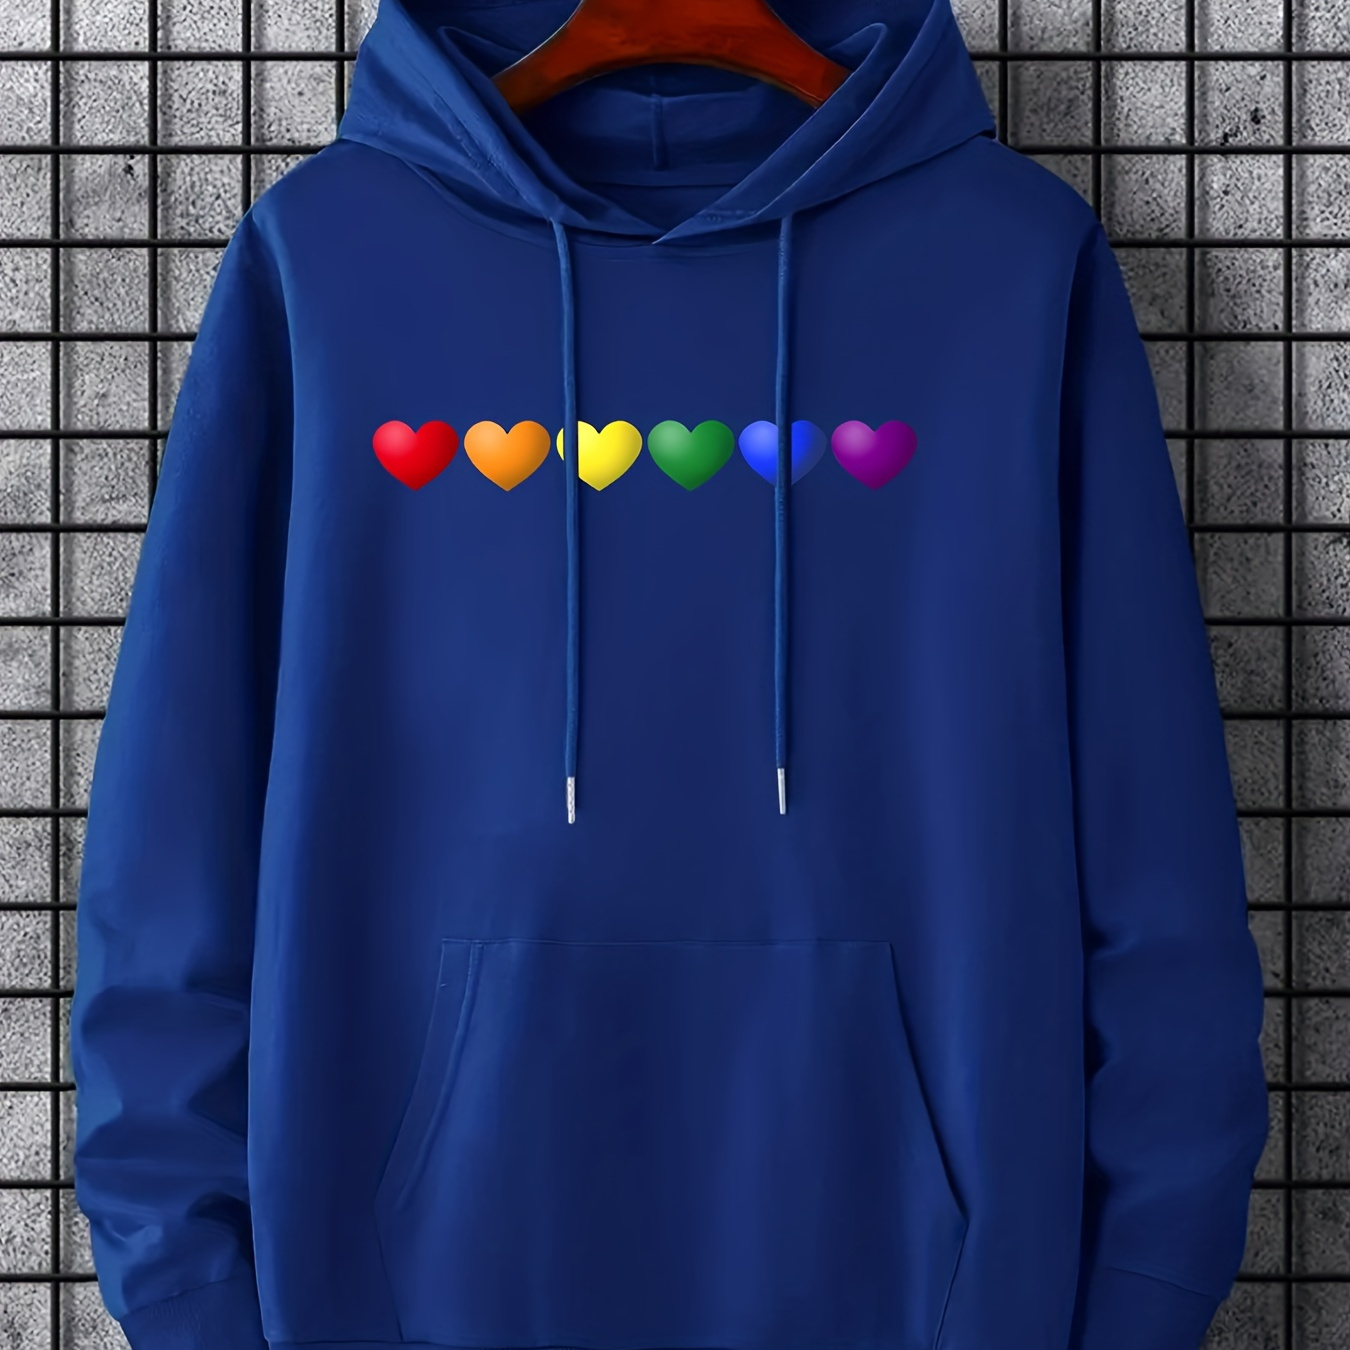 

Rainbow Colors Heart Print Hoodie, Pride Month Hoodies For Men, Men’s Casual Graphic Design Lgbt Pullover Hooded Sweatshirt With Kangaroo Pocket For Spring Fall, As Gifts